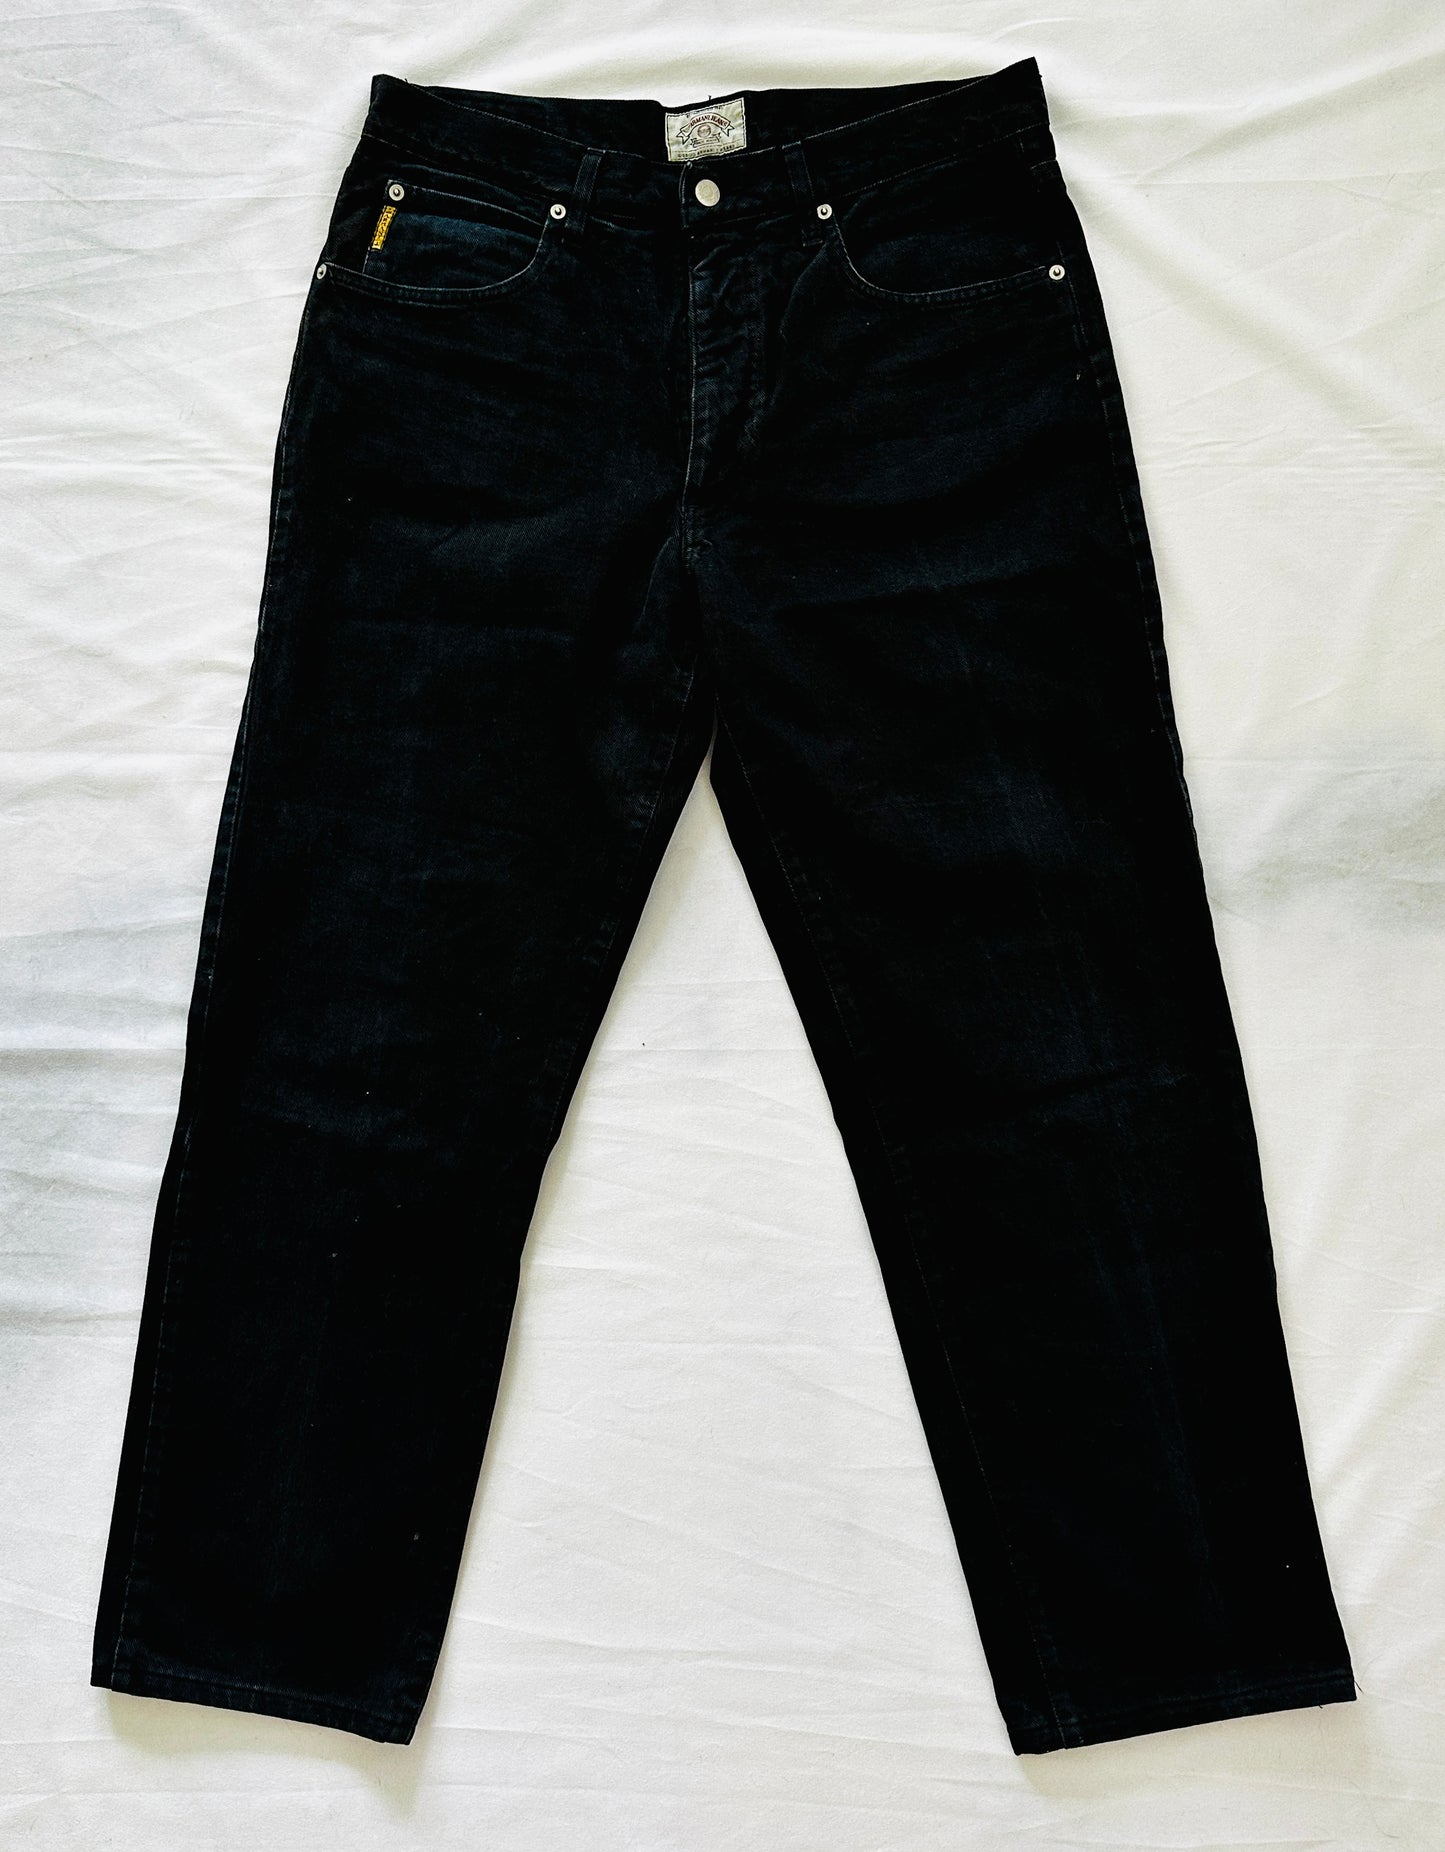 Armani Jeans Vintage 80s Pants - 36 - Made in Italy